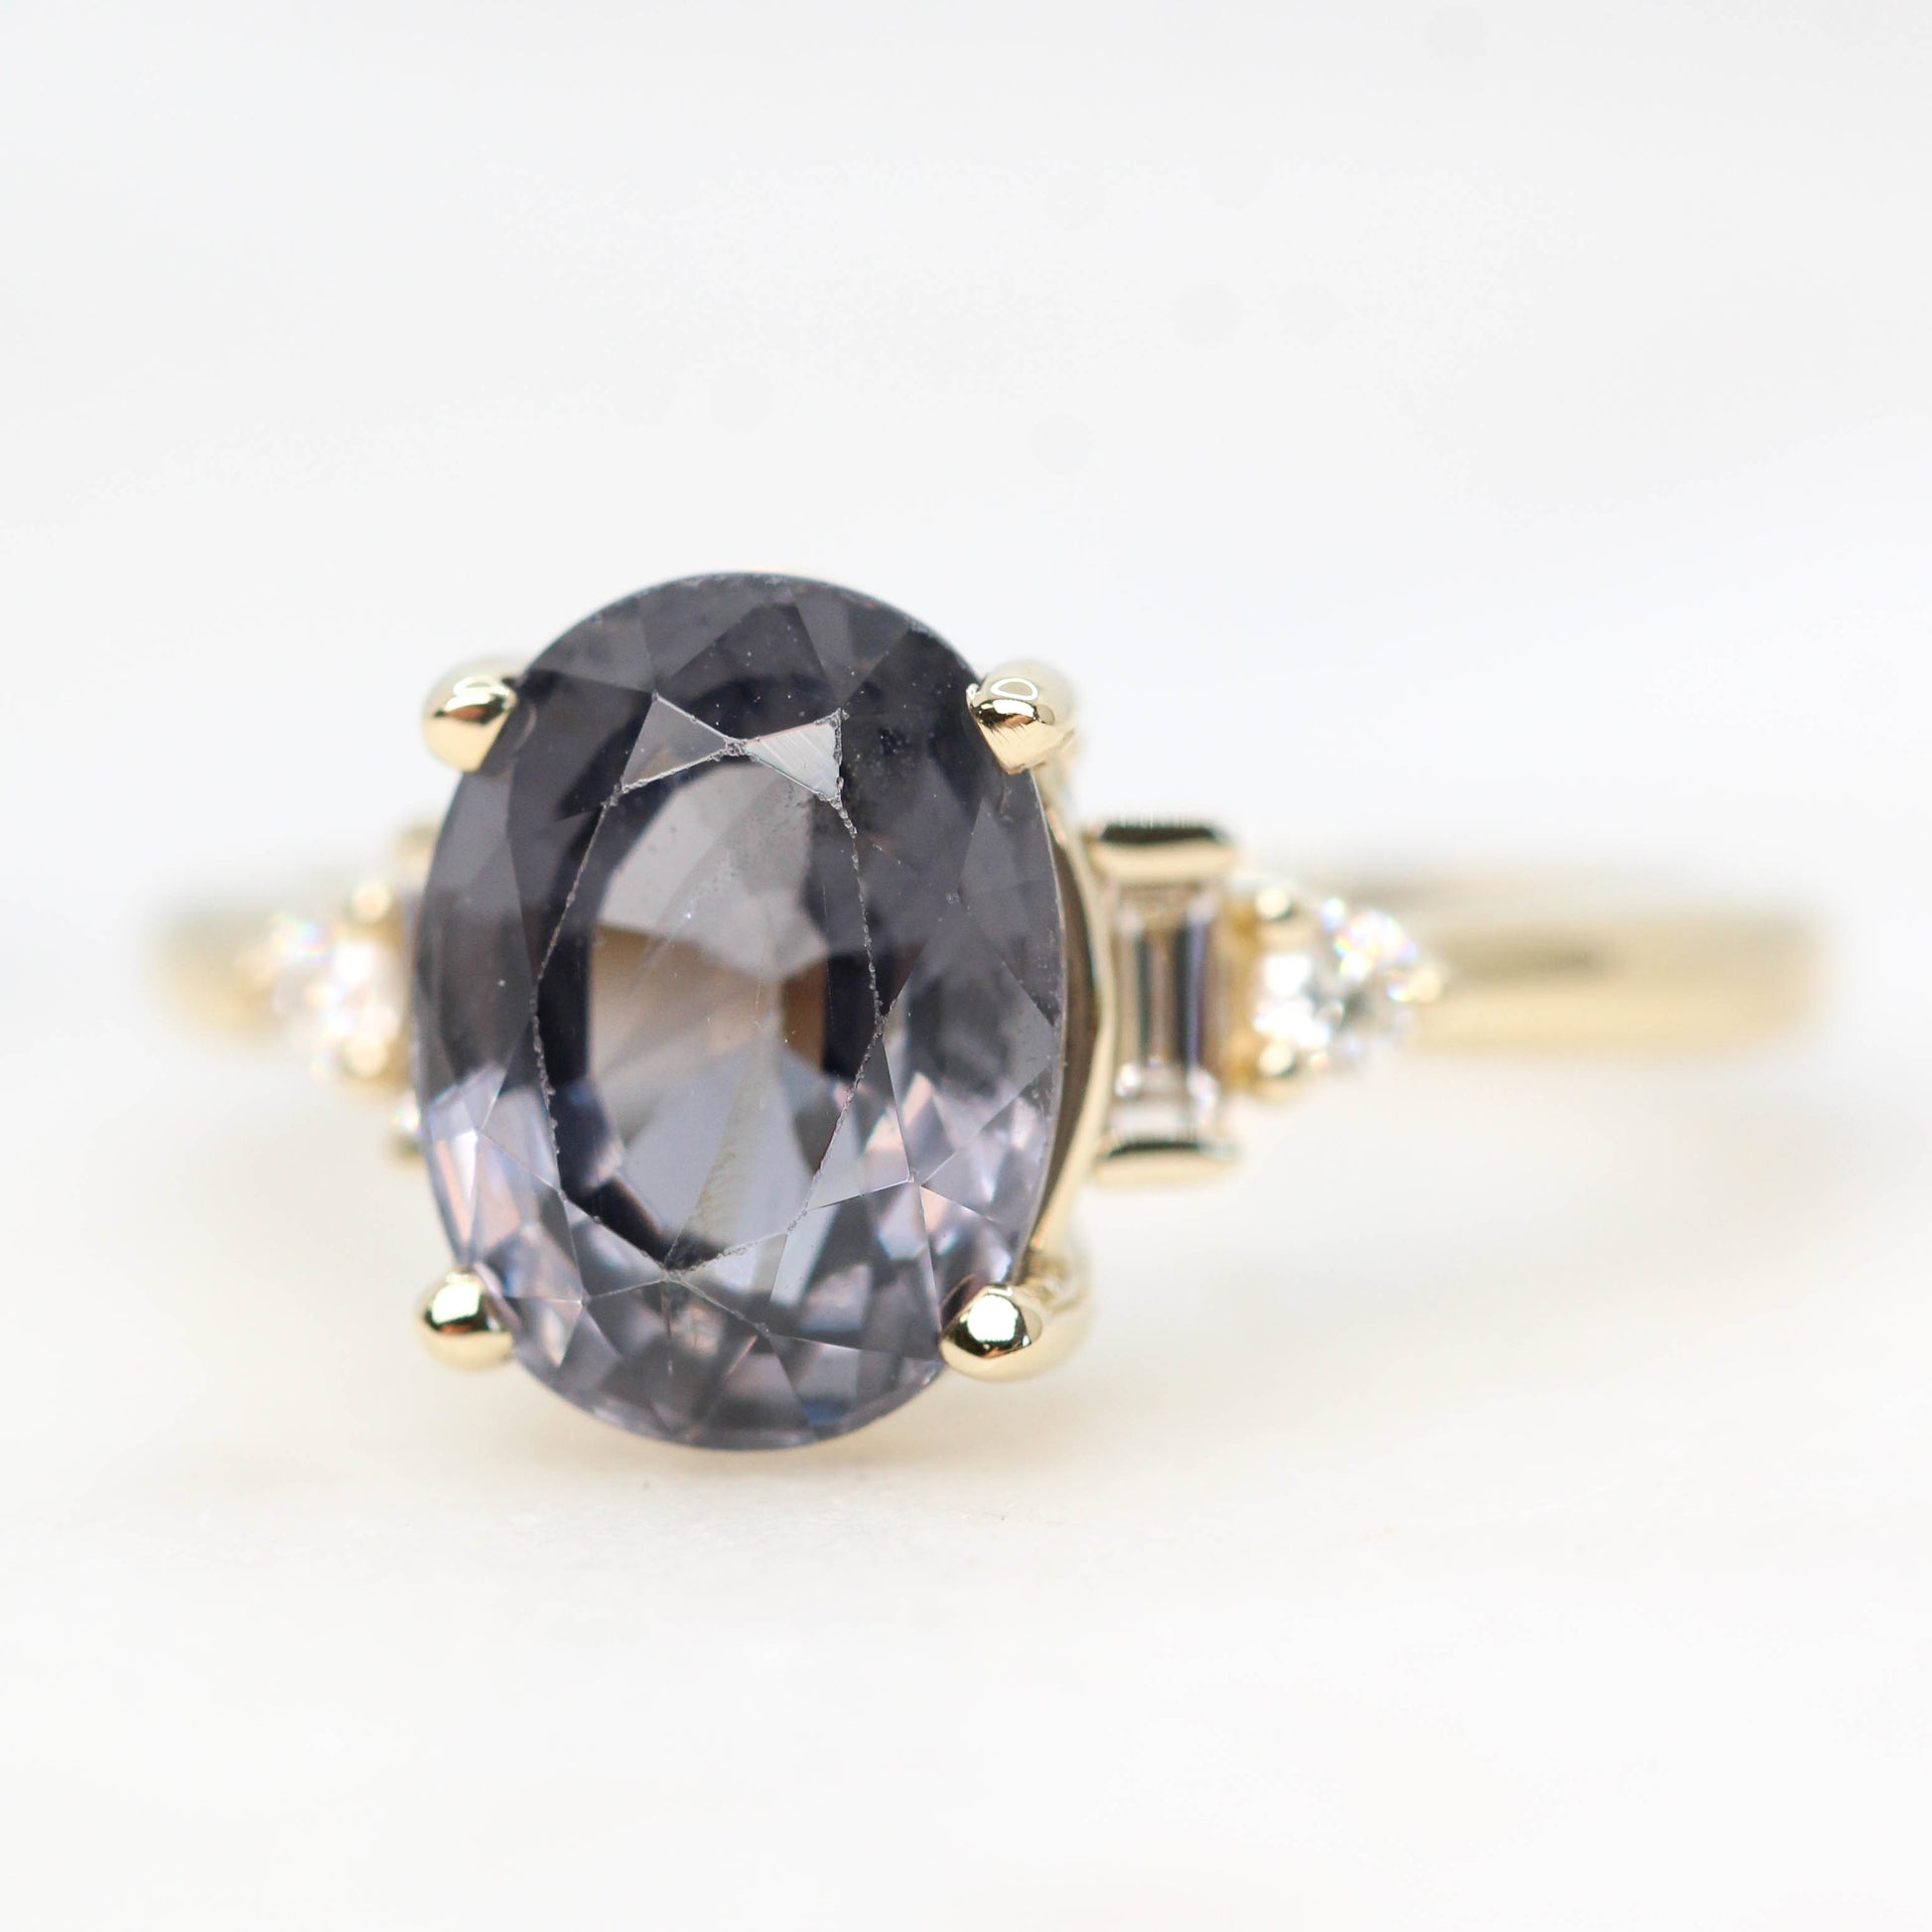 Iris Ring with a 3.87 Carat Oval Spinel and White Accent Diamonds in 14k Yellow Gold - Ready to Size and Ship - Midwinter Co. Alternative Bridal Rings and Modern Fine Jewelry